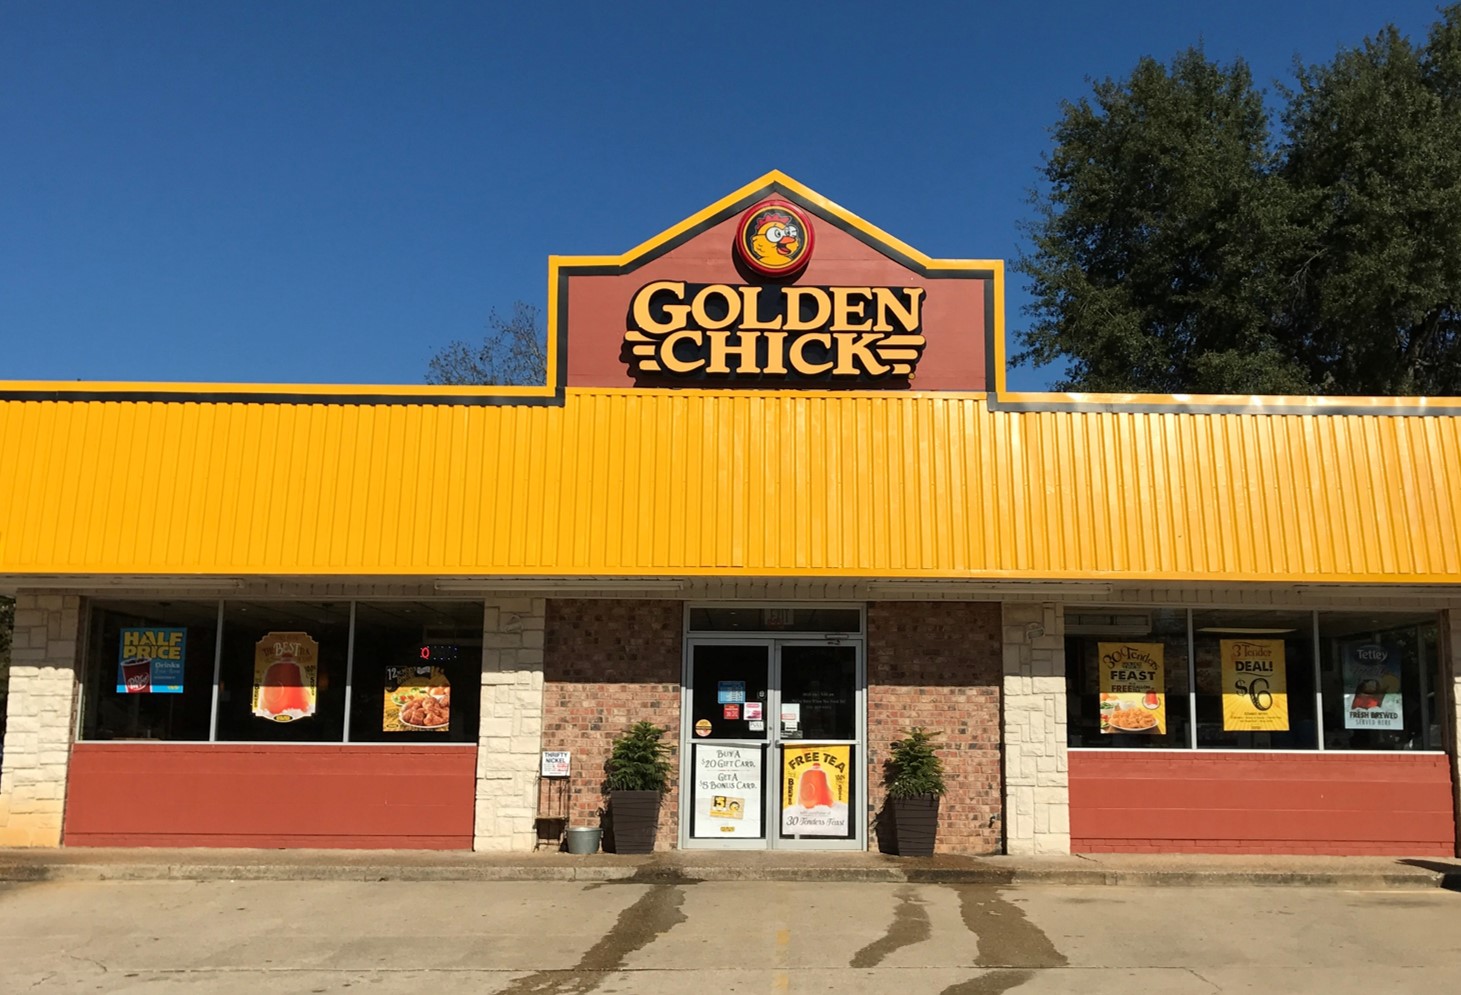 Golden Chick storefront.  Your local Golden Chick fast food restaurant in Mineola, Texas